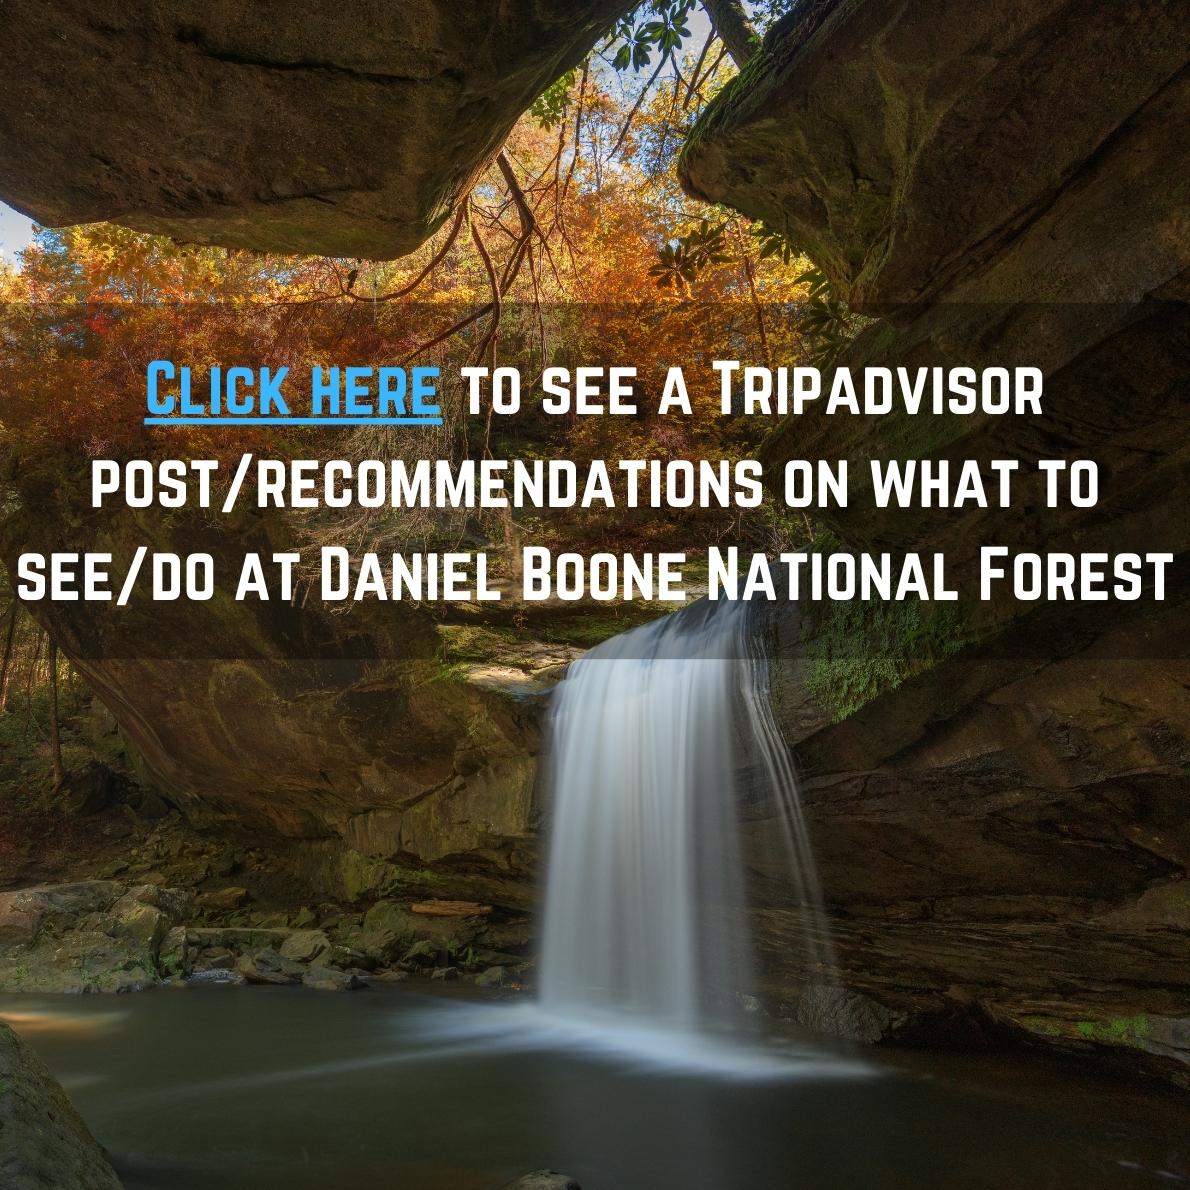 daniel boone national forest forum on what to do